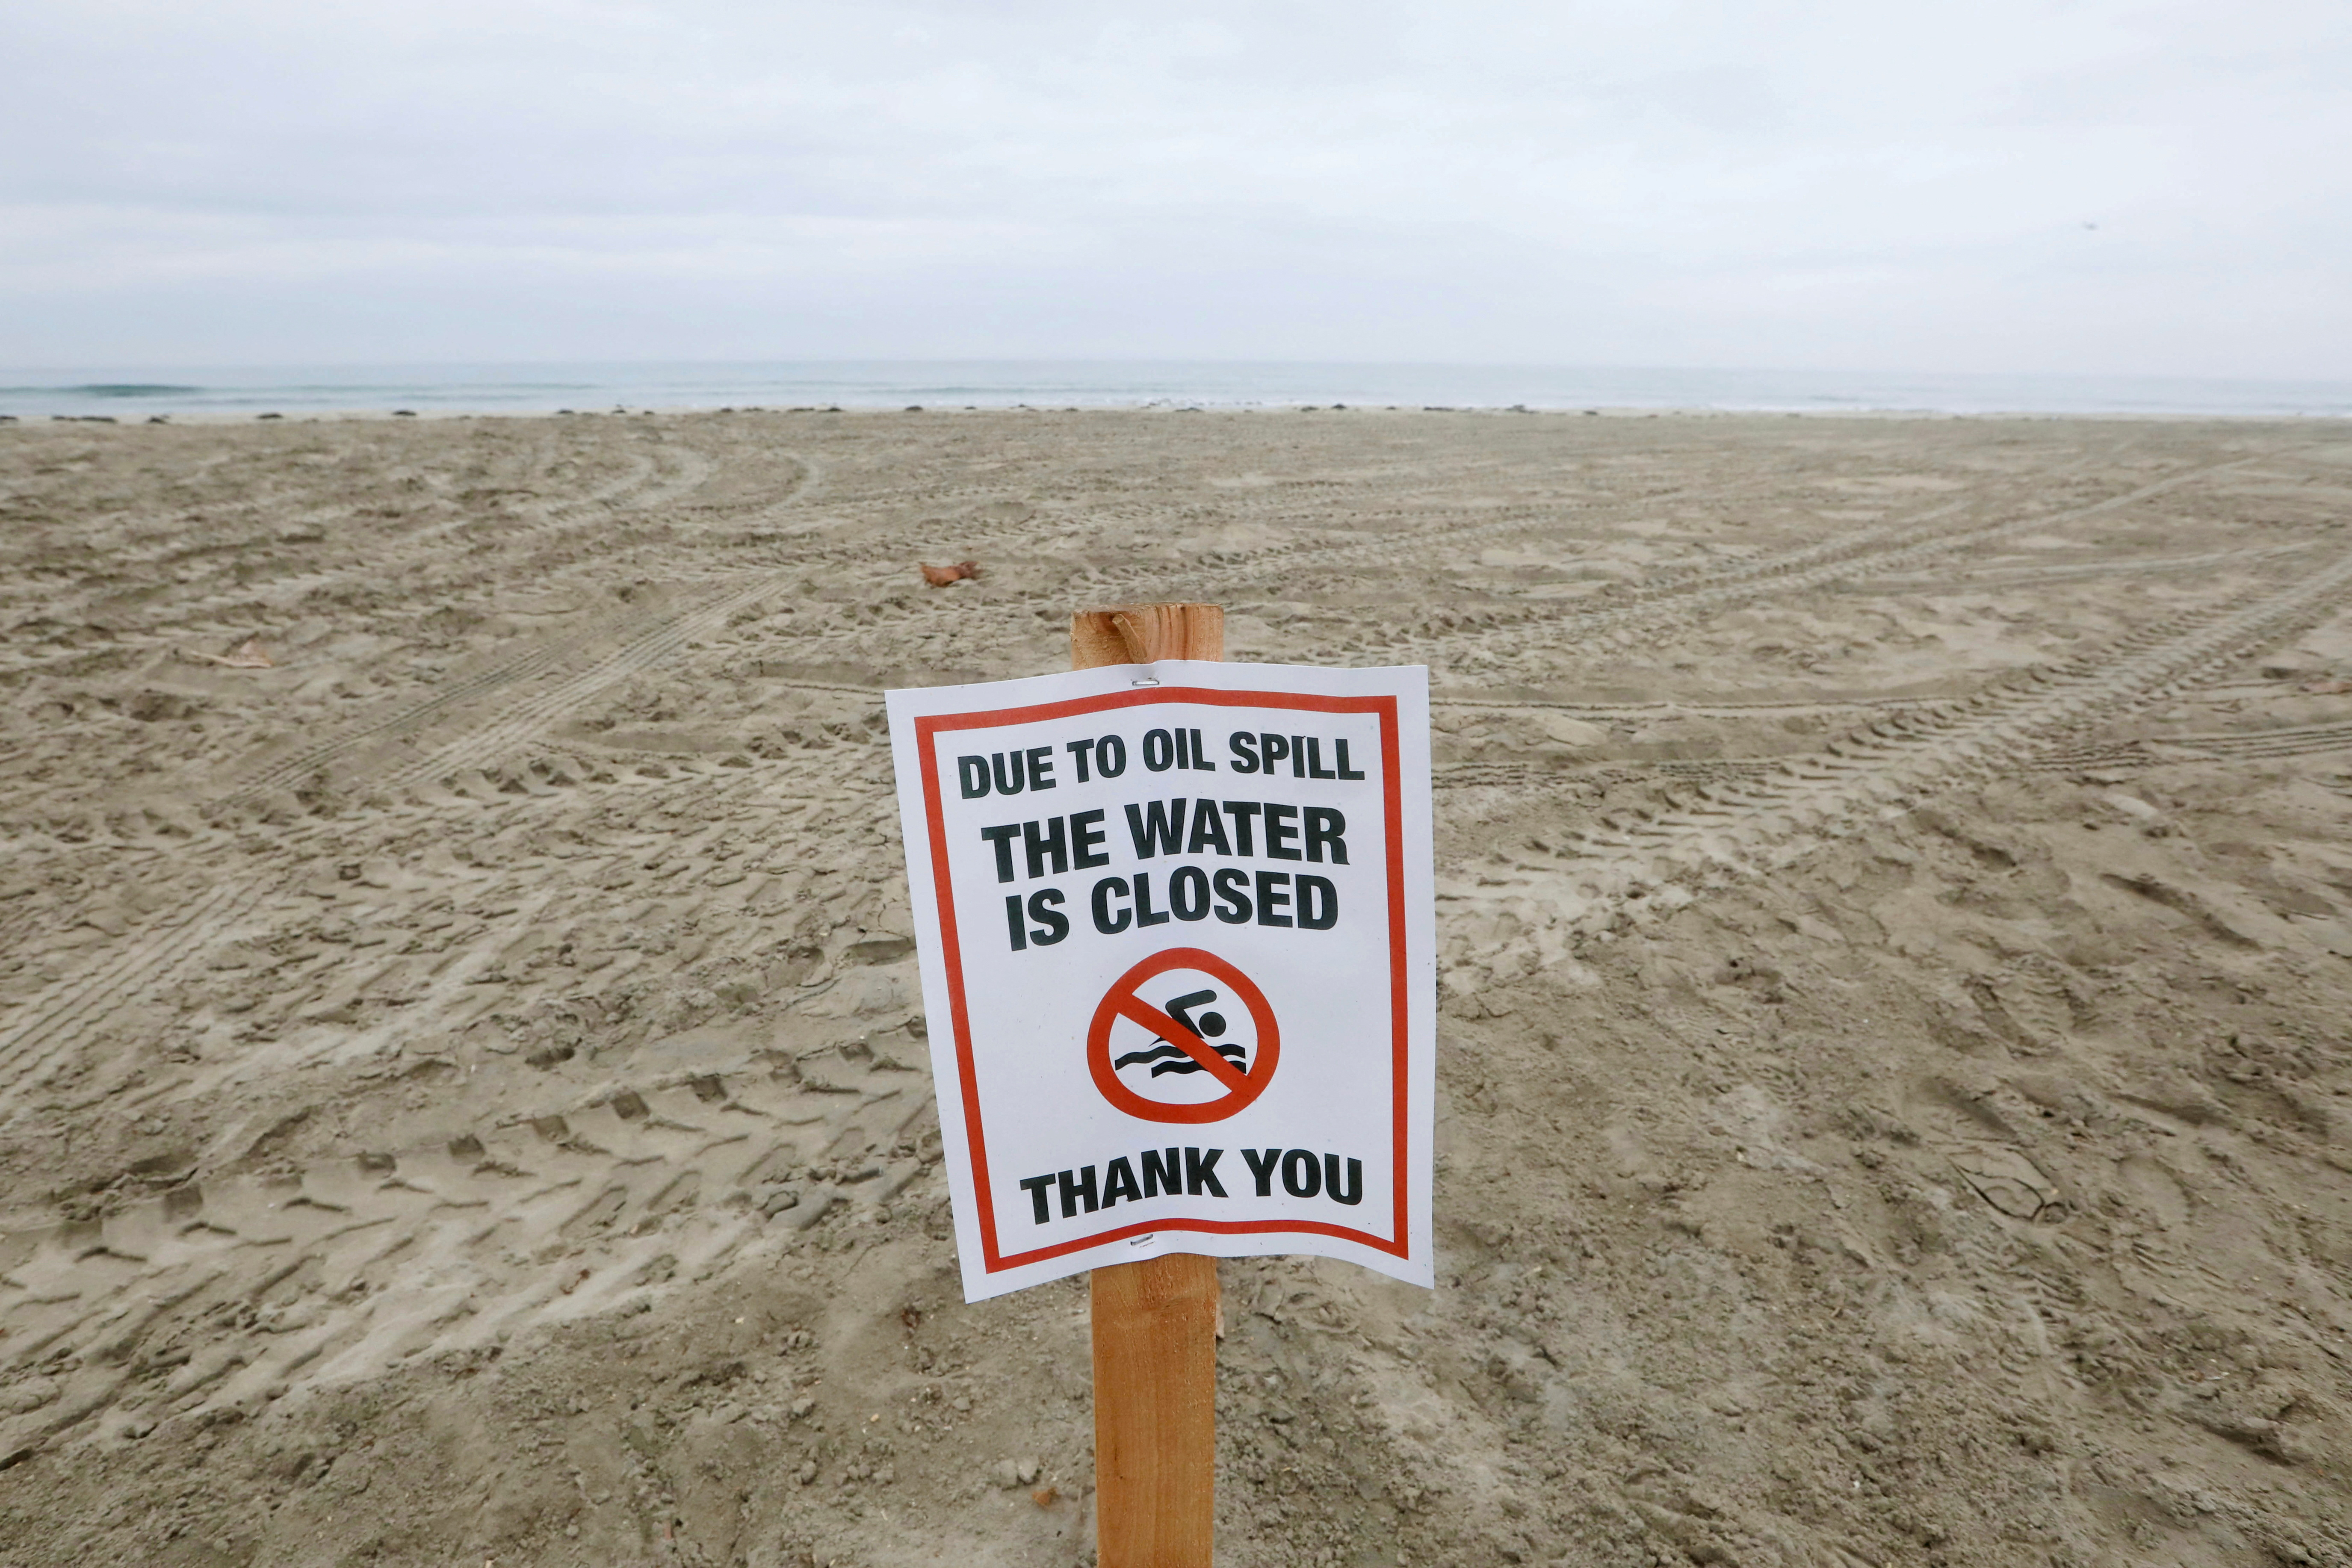 Crude oil spill on southern California beaches